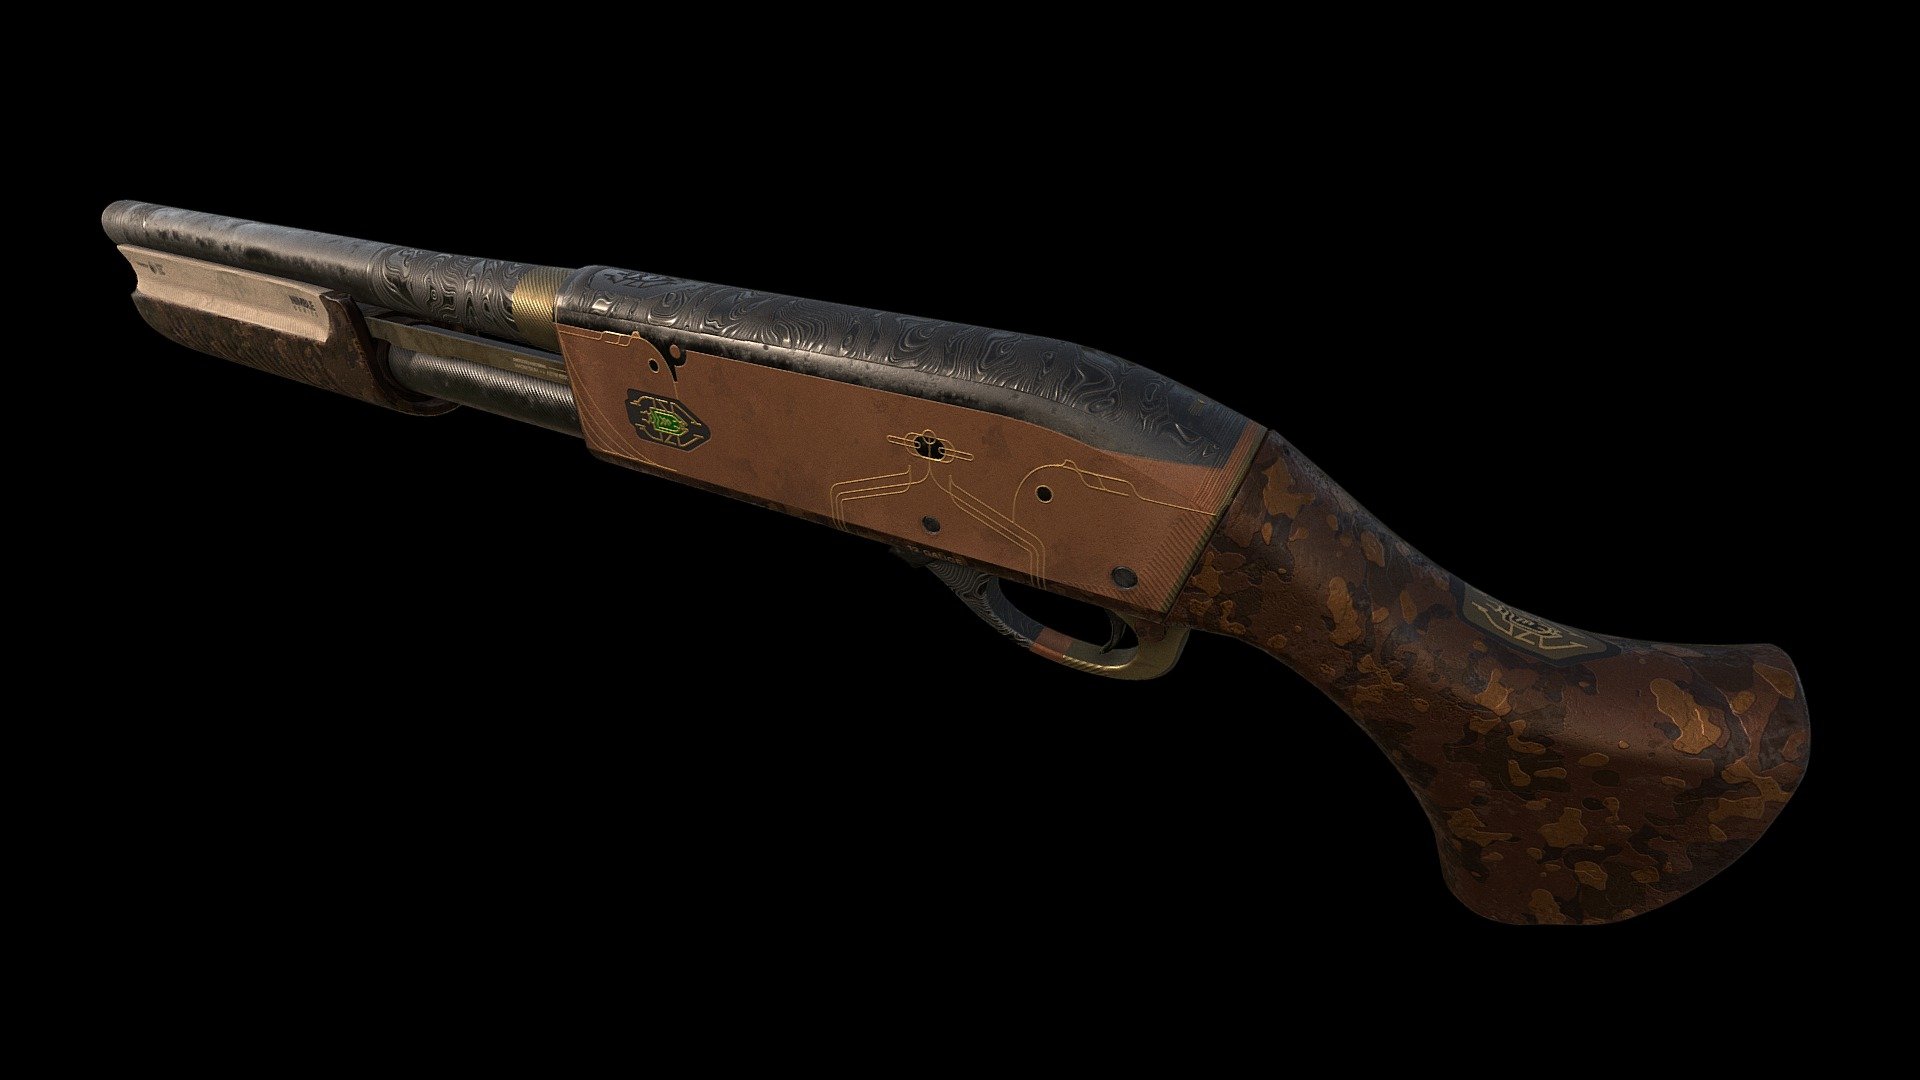 Concept texture/skin for Counter Strike 2 If you want to see my work ingame., vote for my workshop submissions here: https://steamcommunity.com/id/tanapta/myworkshopfiles/



This work includes complete texture/material set on a predefined ingame model.

My focus was and always will be to create medium-tier weapon skins, that are relatively neutral and not overly complicated. I know there are so many superb artists that create a true pieces of Art - I’m just a humble ui/ux designer that puts his soul to create a niche of guns that fit my needs.

Like all of my work, I will adapt this style to various guns with changes and adjustments where it seems necessary (for example additional material because of model complexity etc).

Much love, Tanapta - SAWEDOFF - Nimble (CS2) - 3D model by tanapta 3d model